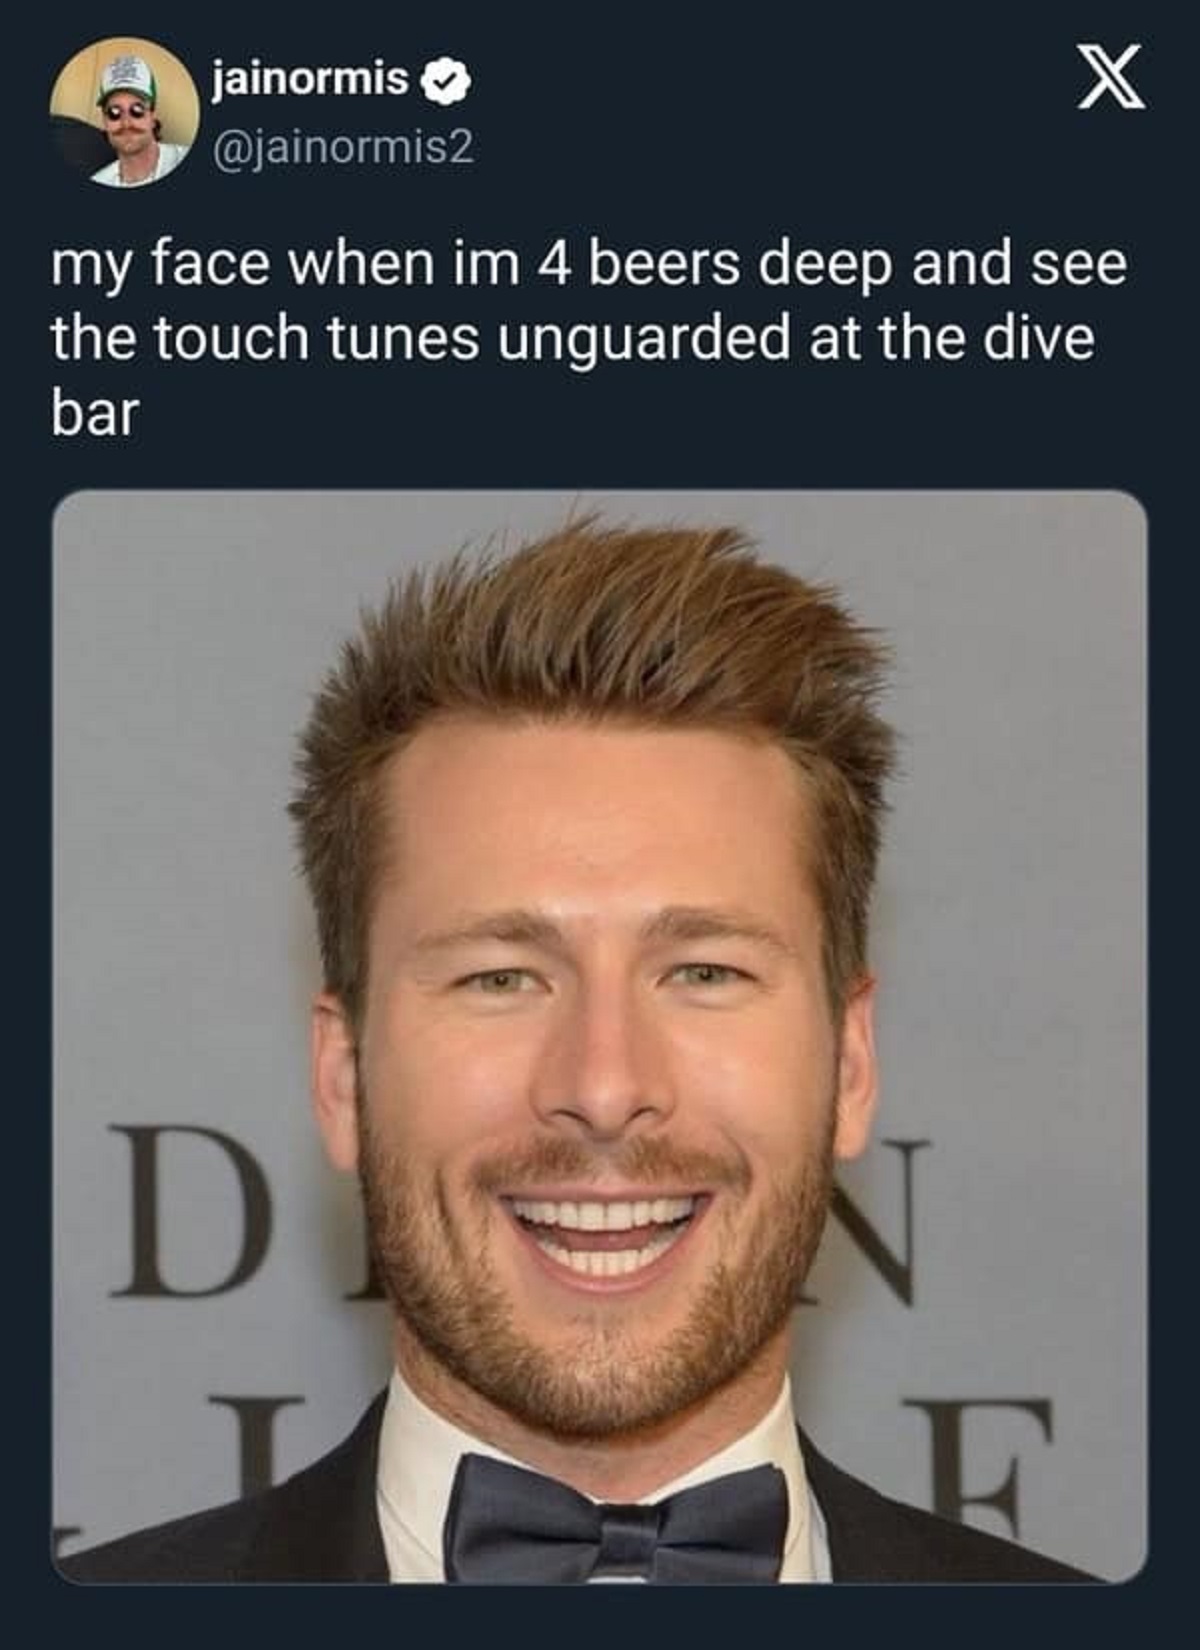 glen powell capybara meme - jainormis X my face when im 4 beers deep and see the touch tunes unguarded at the dive bar D N F